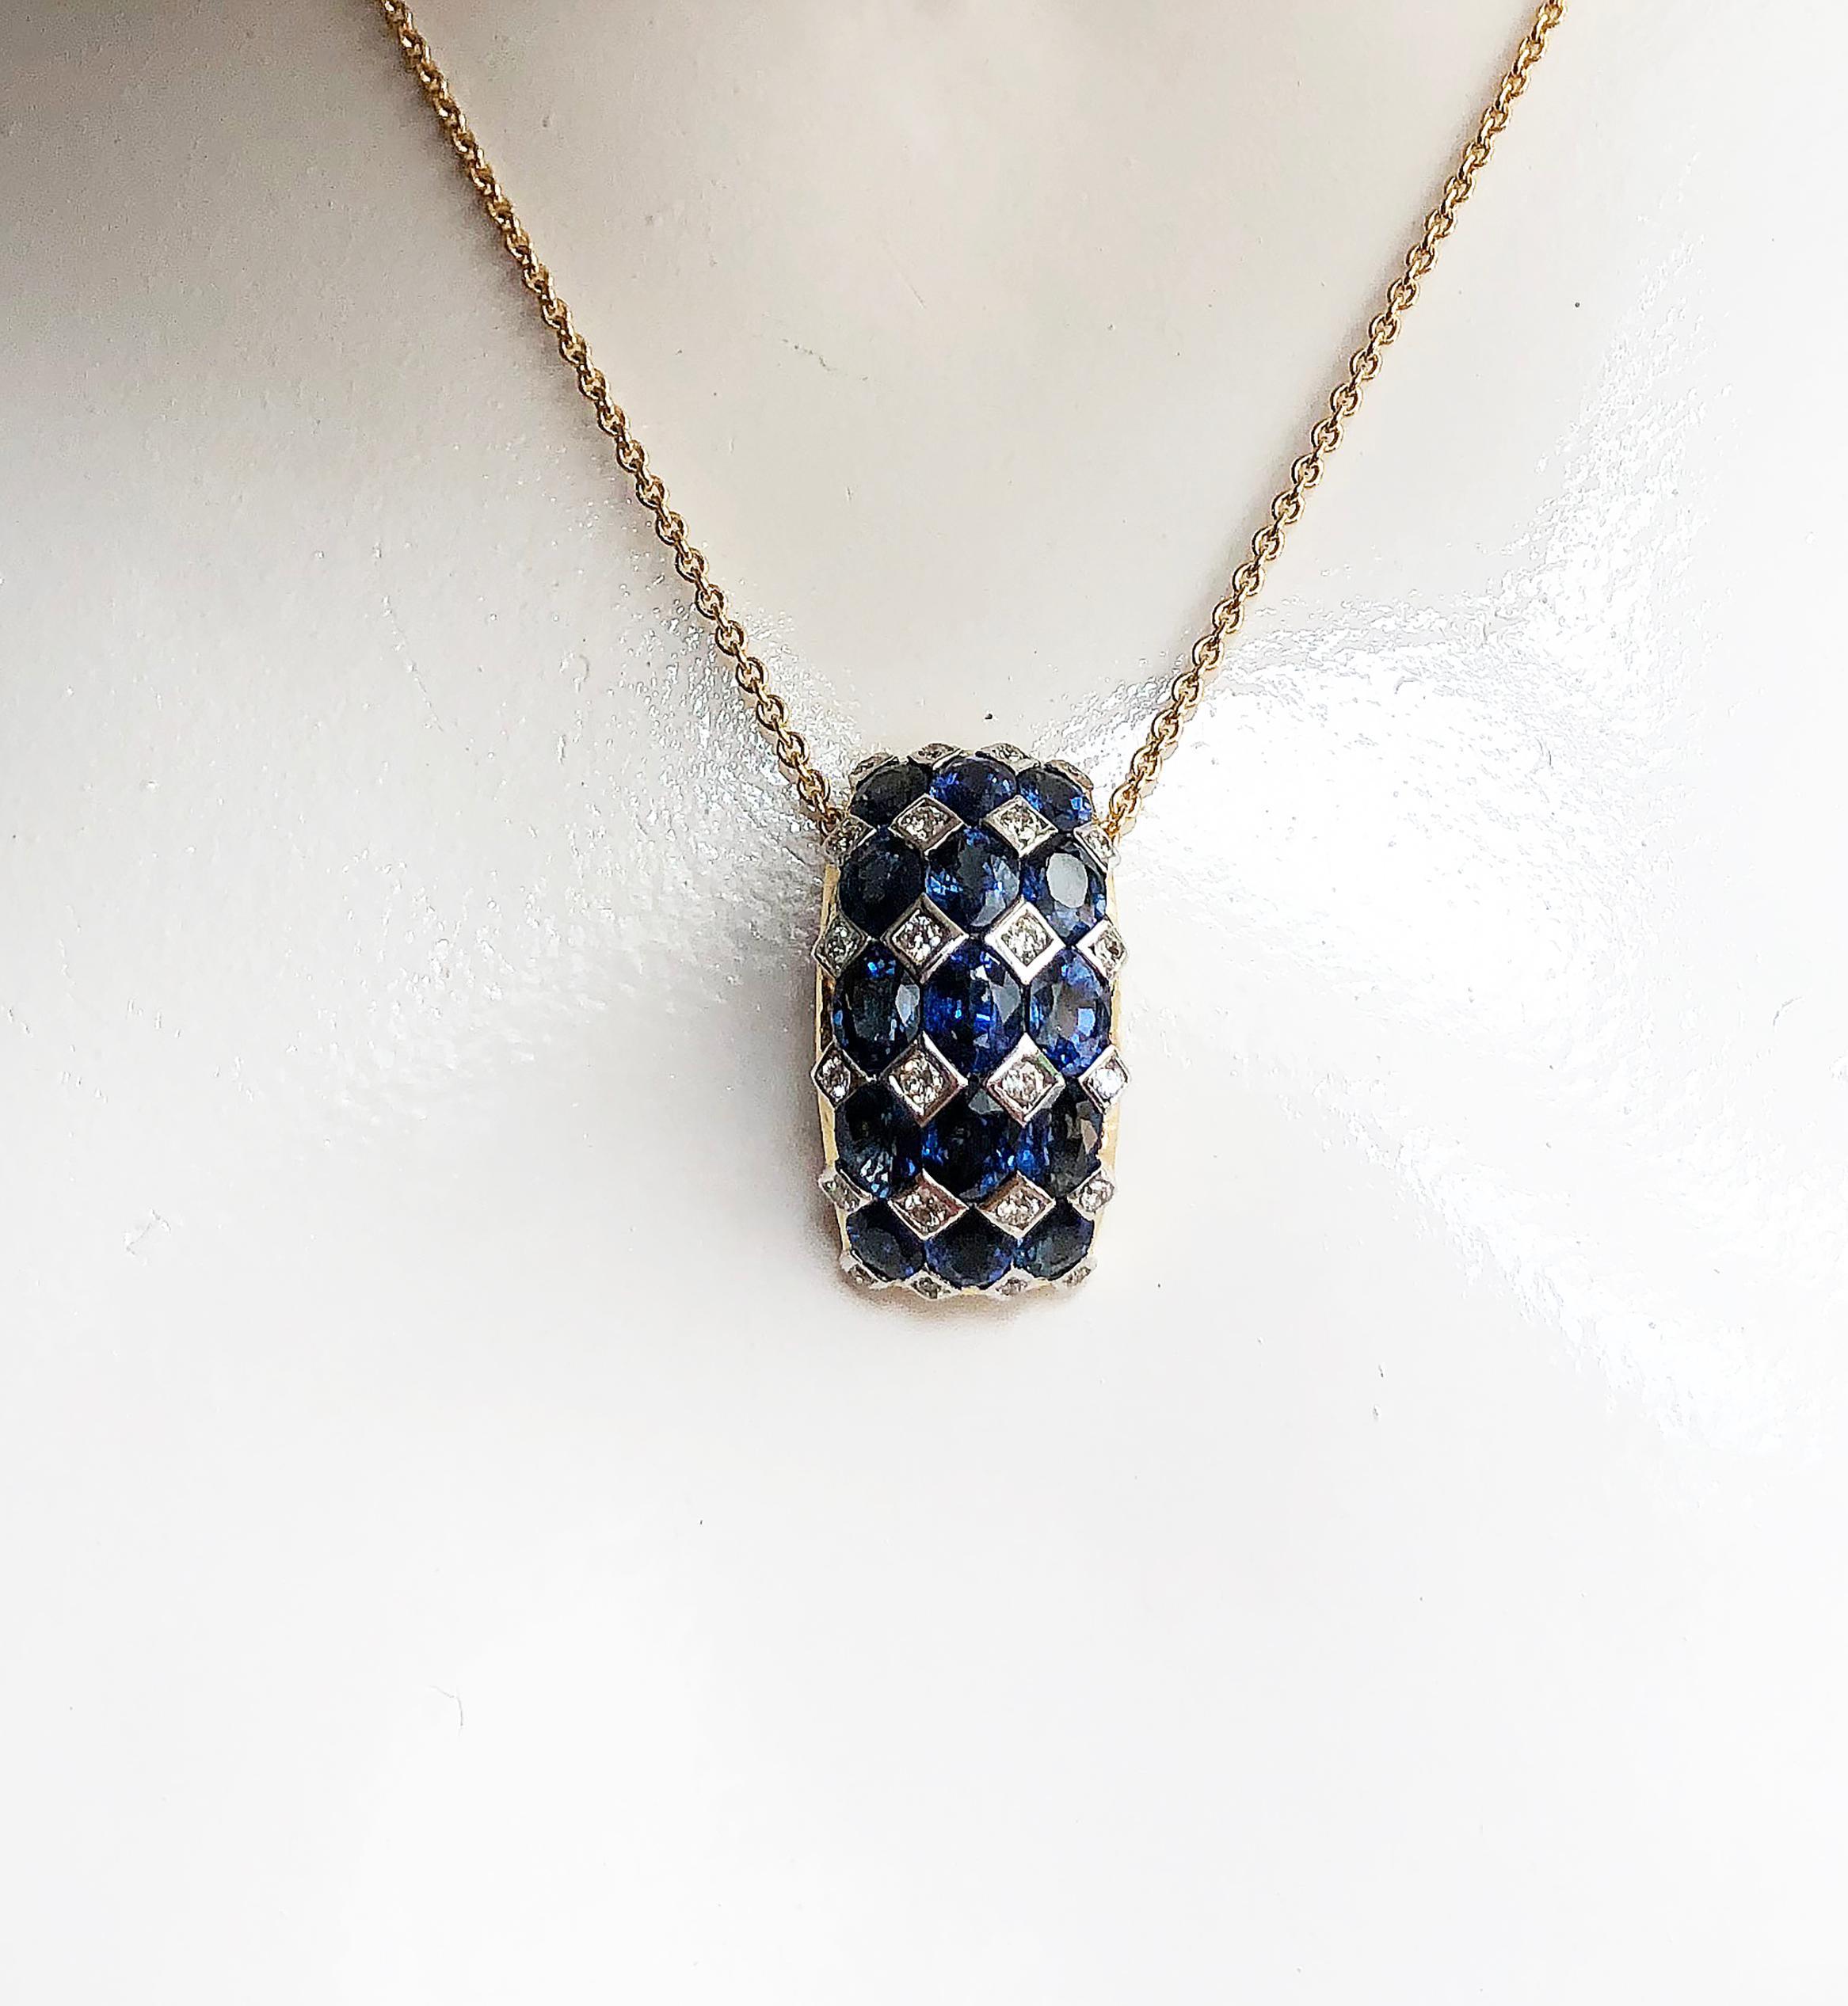 Blue Sapphire 6.19 carats with Diamond 0.33 carat Pendant set in 18 Karat Gold Settings
(chain not included)

Width: 1.0 cm
Length: 2.3 cm 

